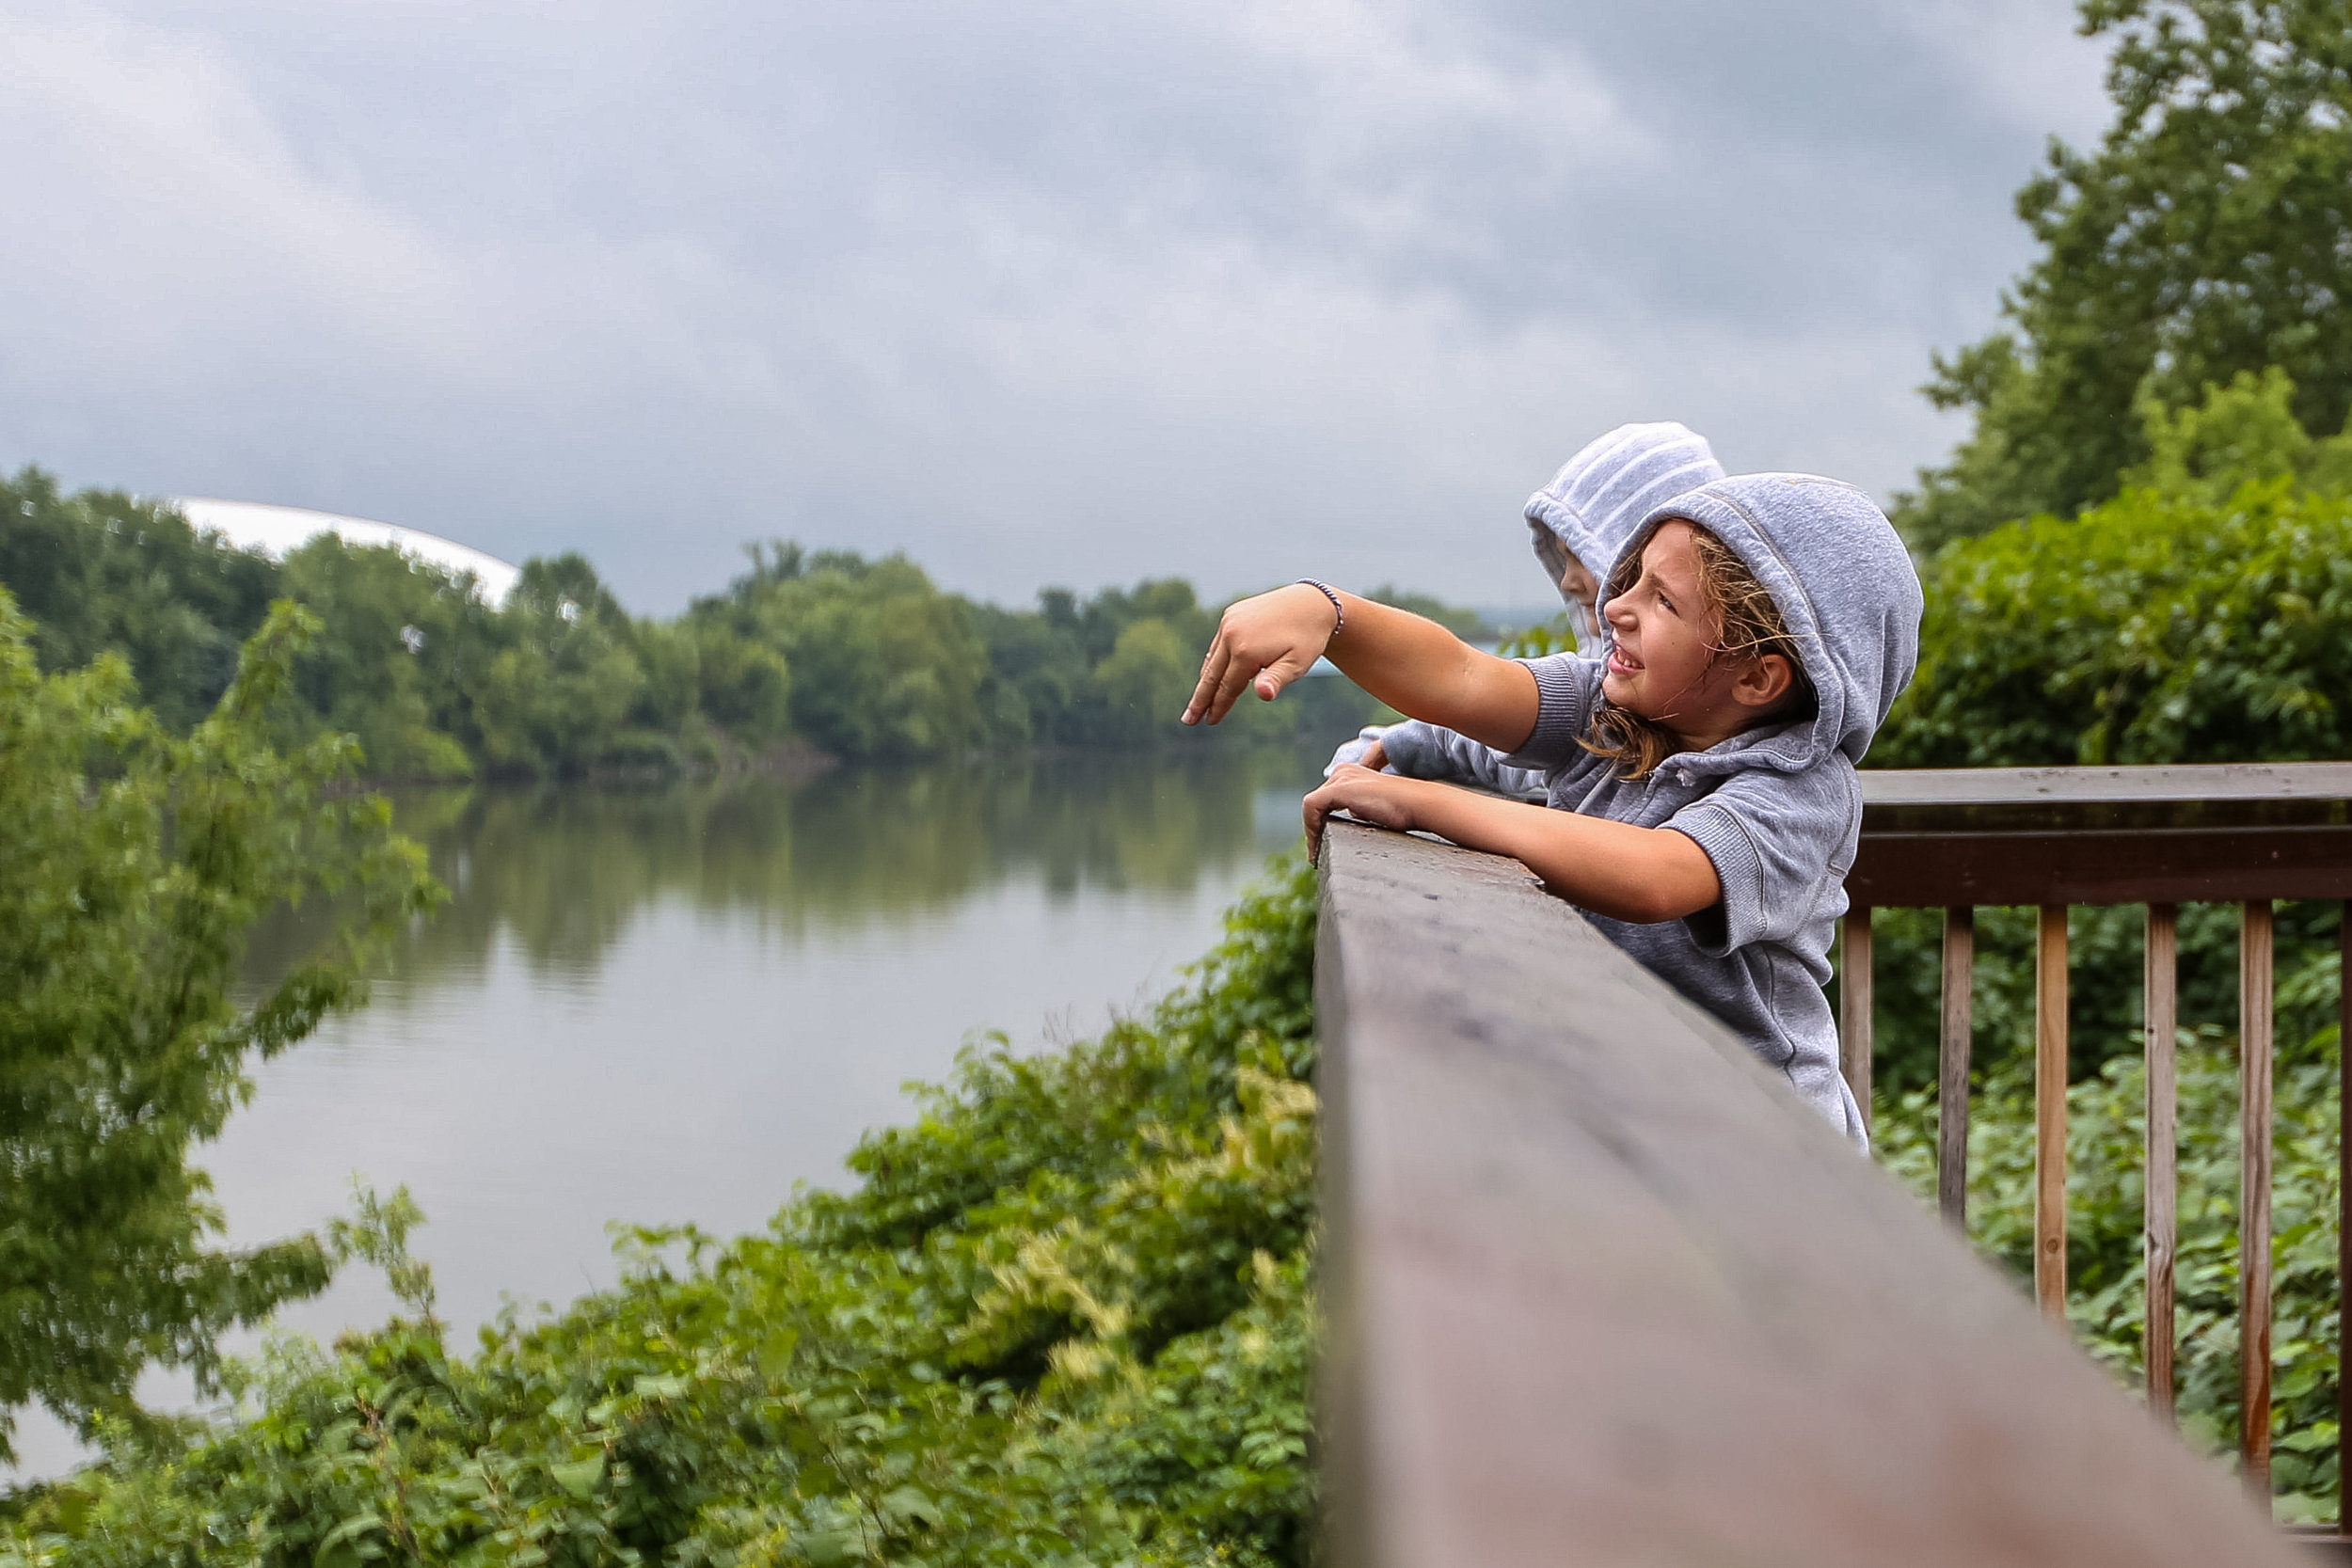  Vega Meredith, 8, watches as she throws a rock into the Ohio River from an overlook in Coraopolis on Wednesday afternoon.  